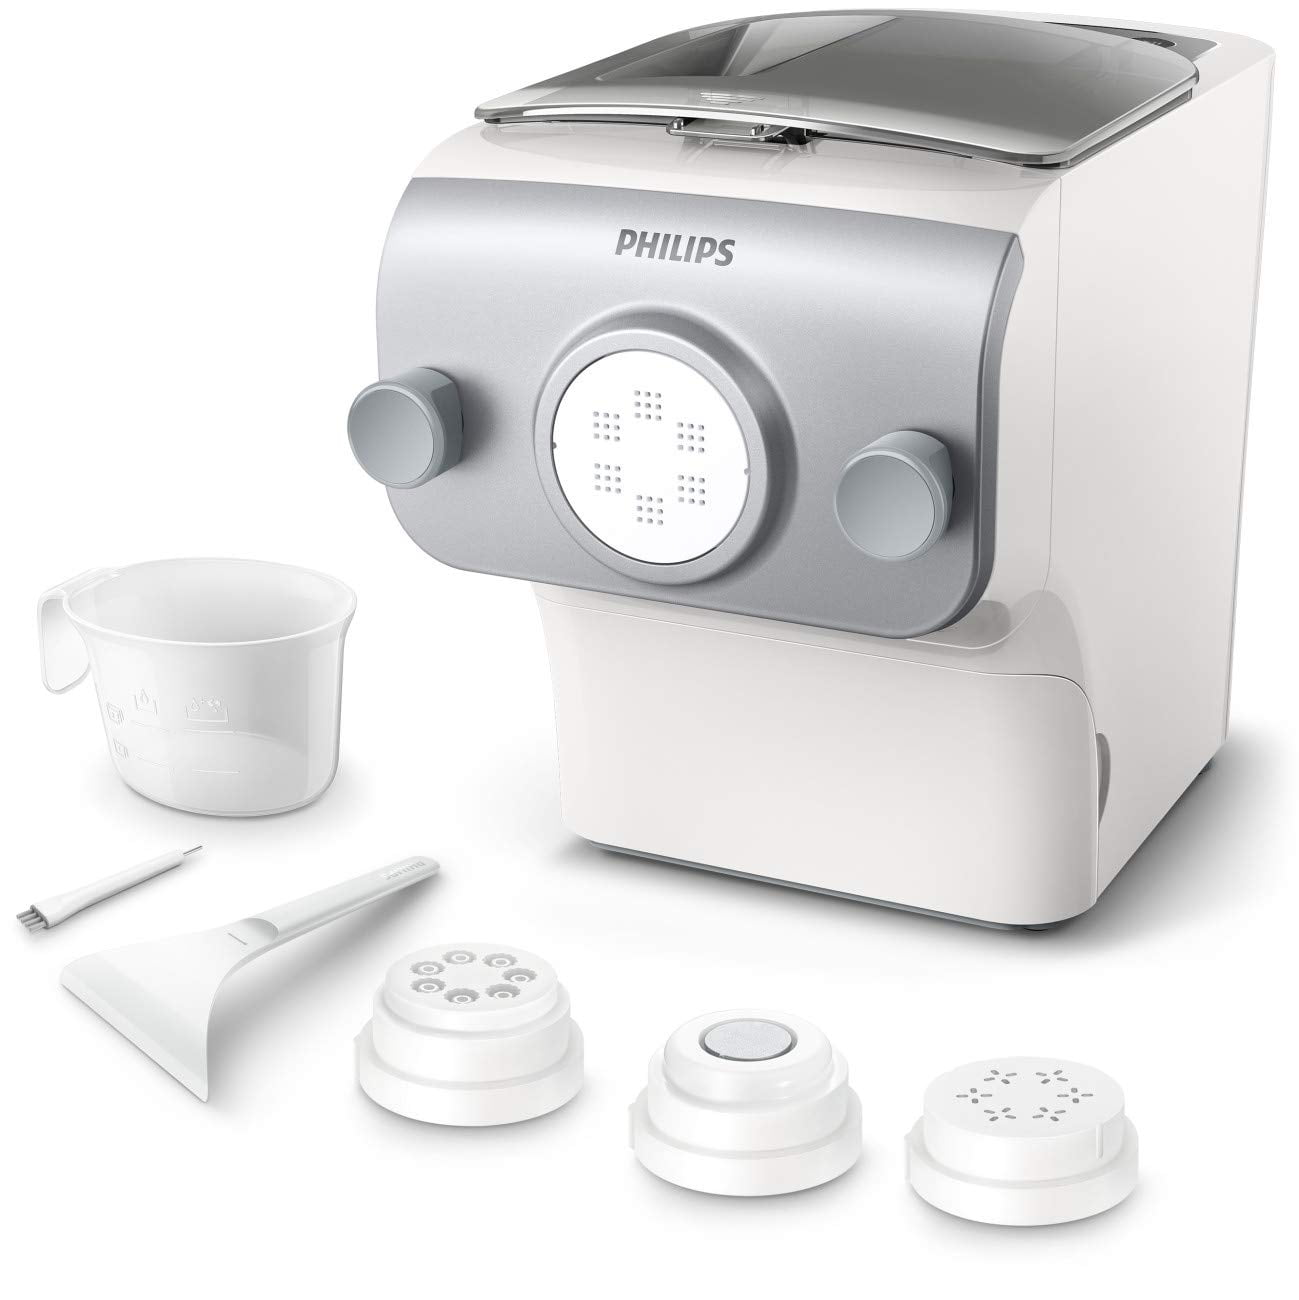 Philips Collection Automatic Pasta and Noodle Maker Plus with 4 Interchangeable Pasta Shaping Discs, Silver - - Walmart.com